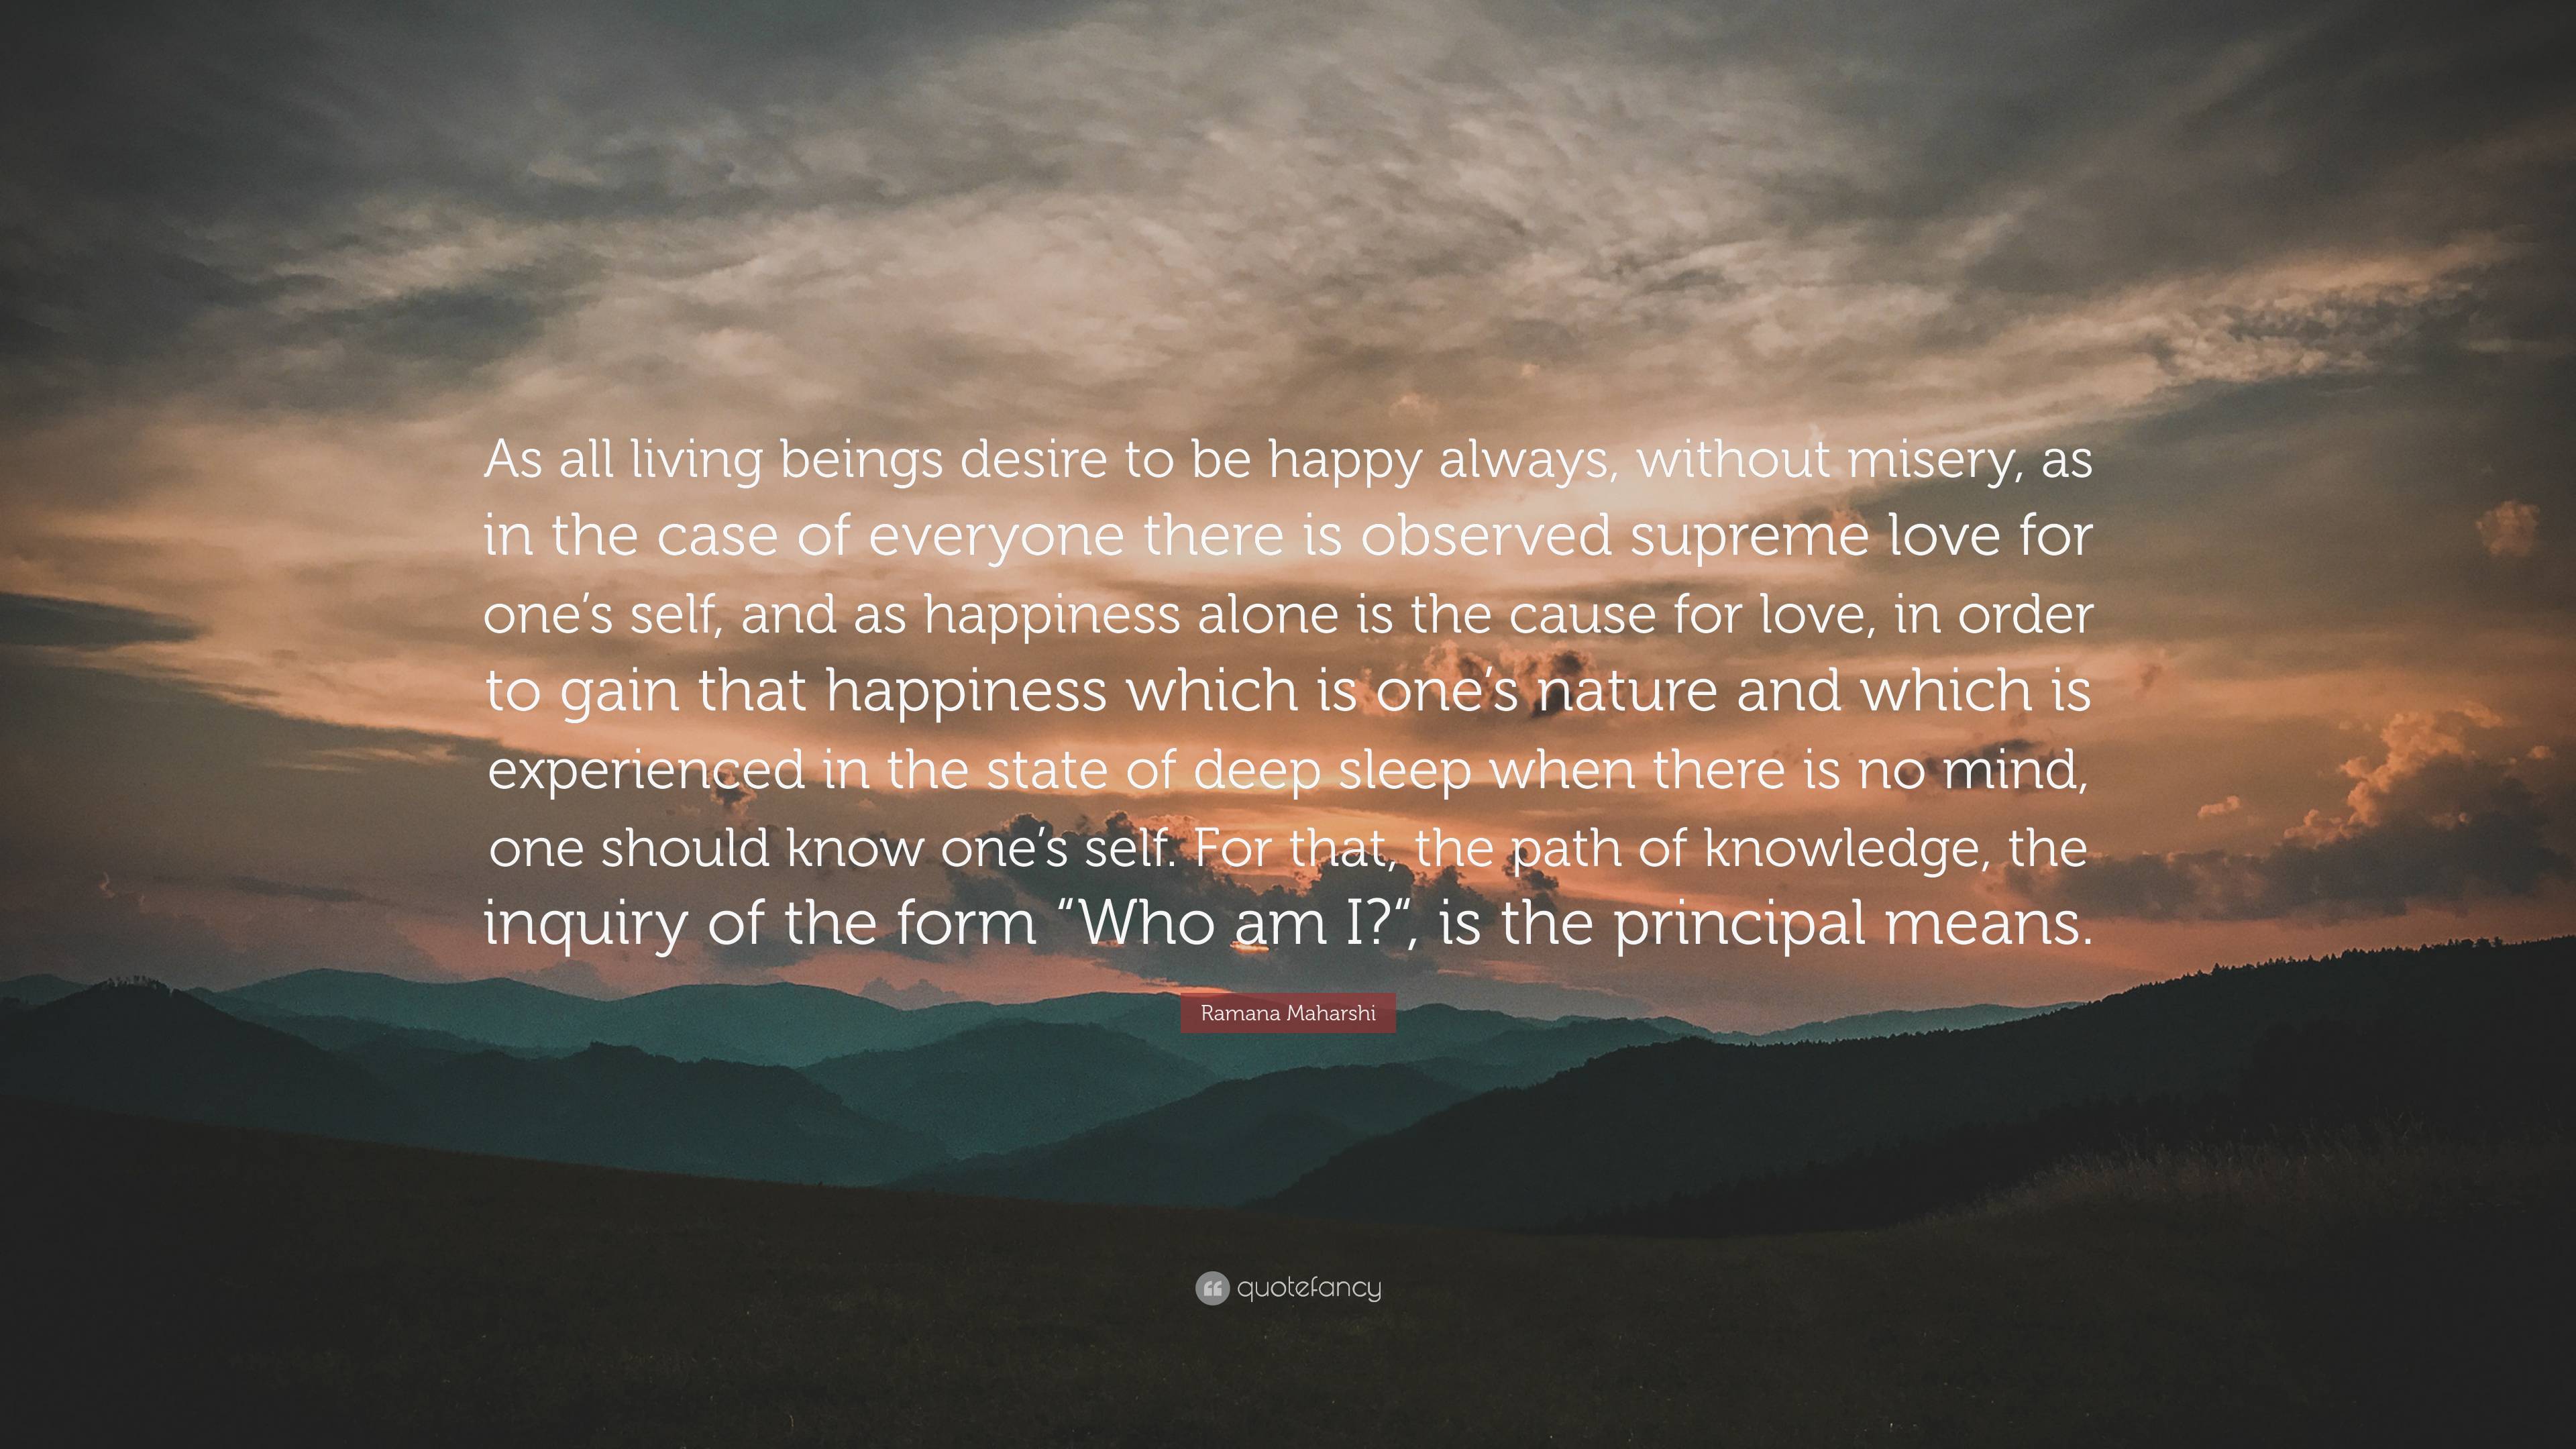 Ramana Maharshi Quote: “As all living beings desire to be happy always ...